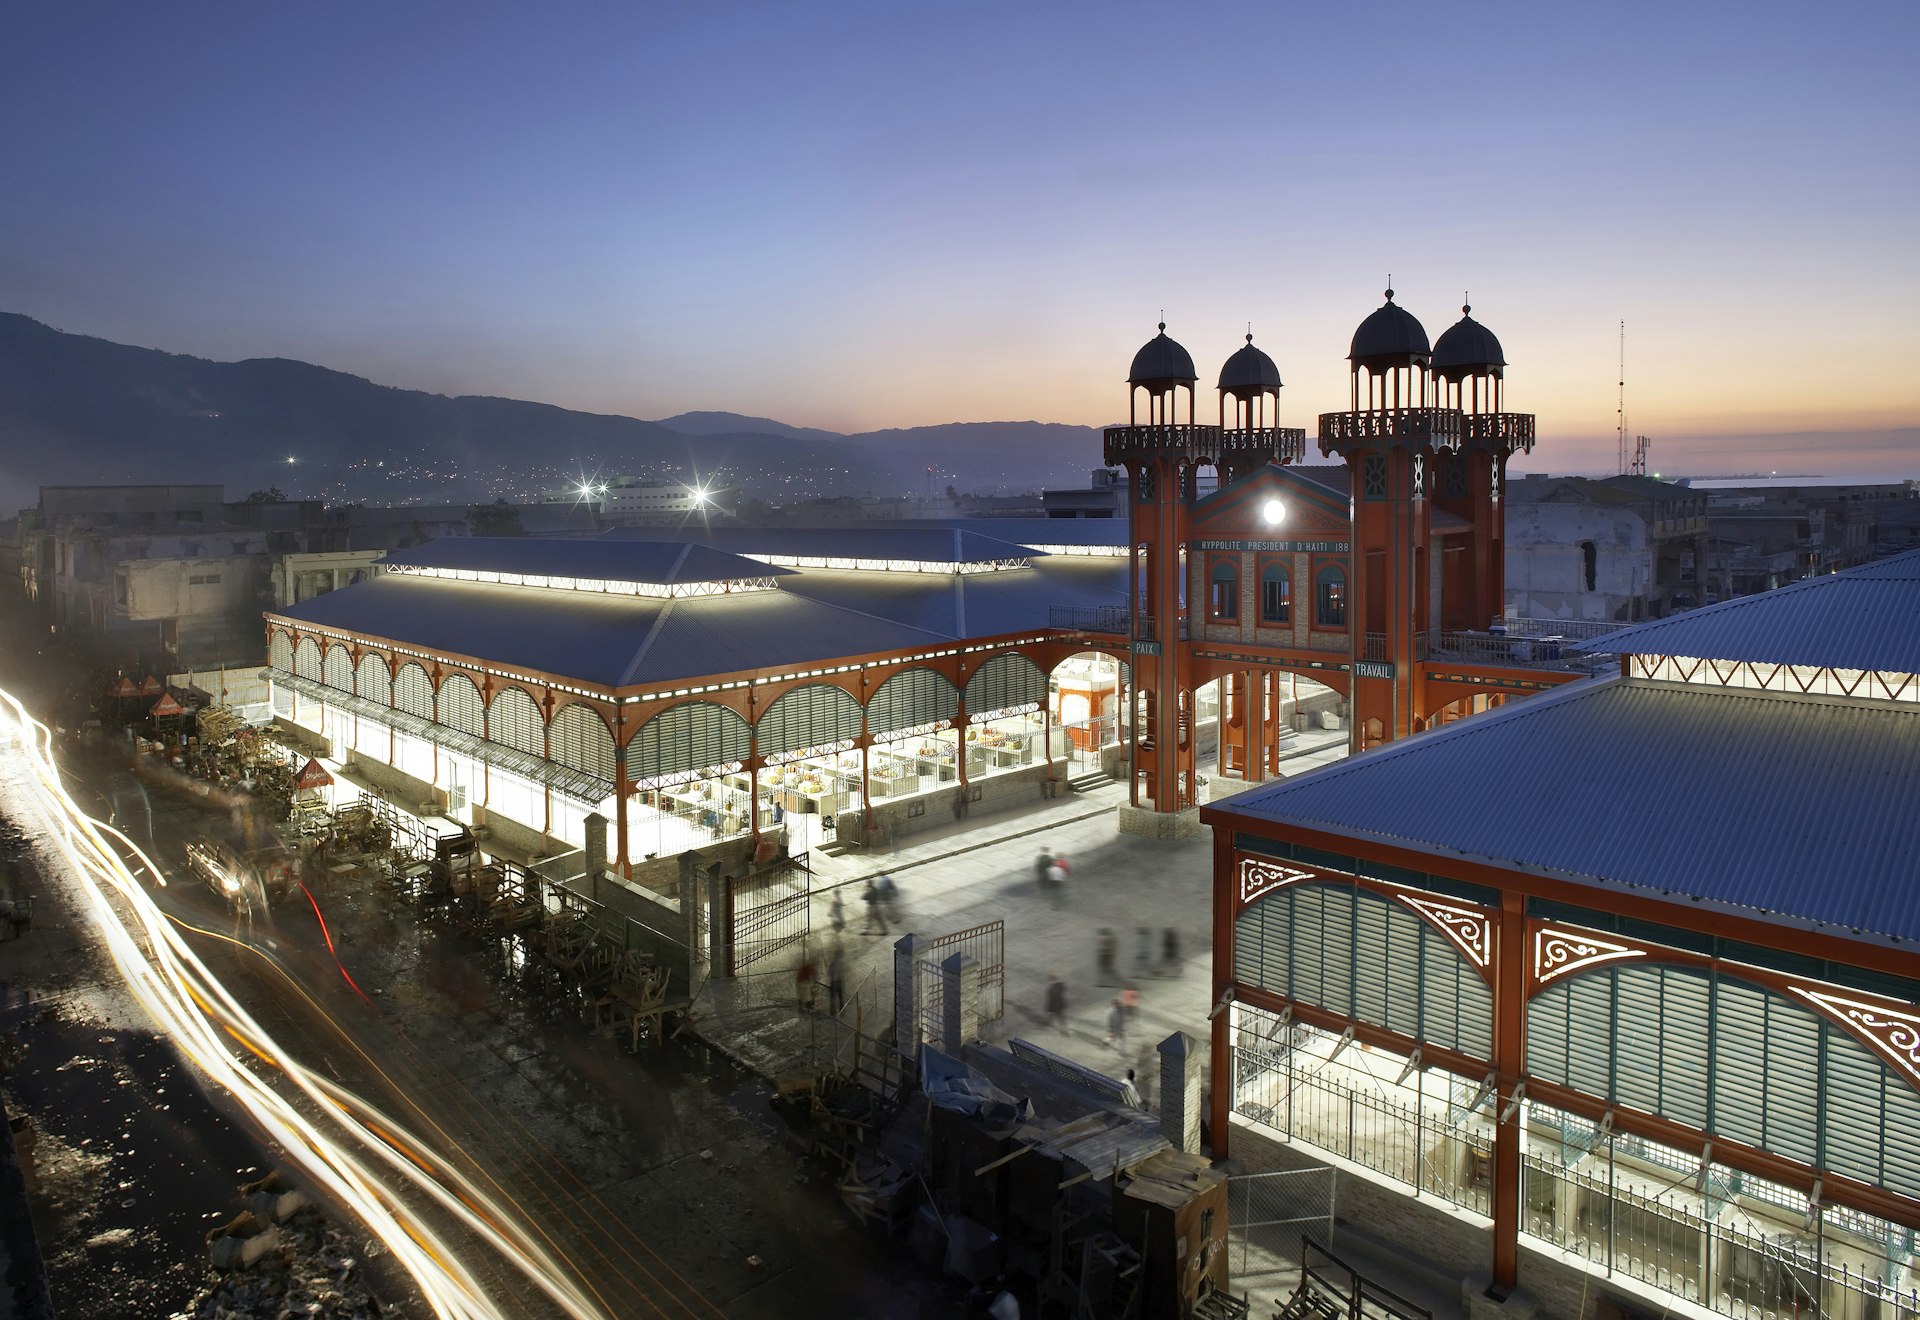 The Iron MarketPortauprinceHaiti, Architect: John Mcaslan And Partners, 2011, The Iron Market, Port-Au-Prince, Haiti, John Mcaslan And Partners, 2011 Twilight Aerial View (Photo by © View Pictures/UIG via Getty Images)